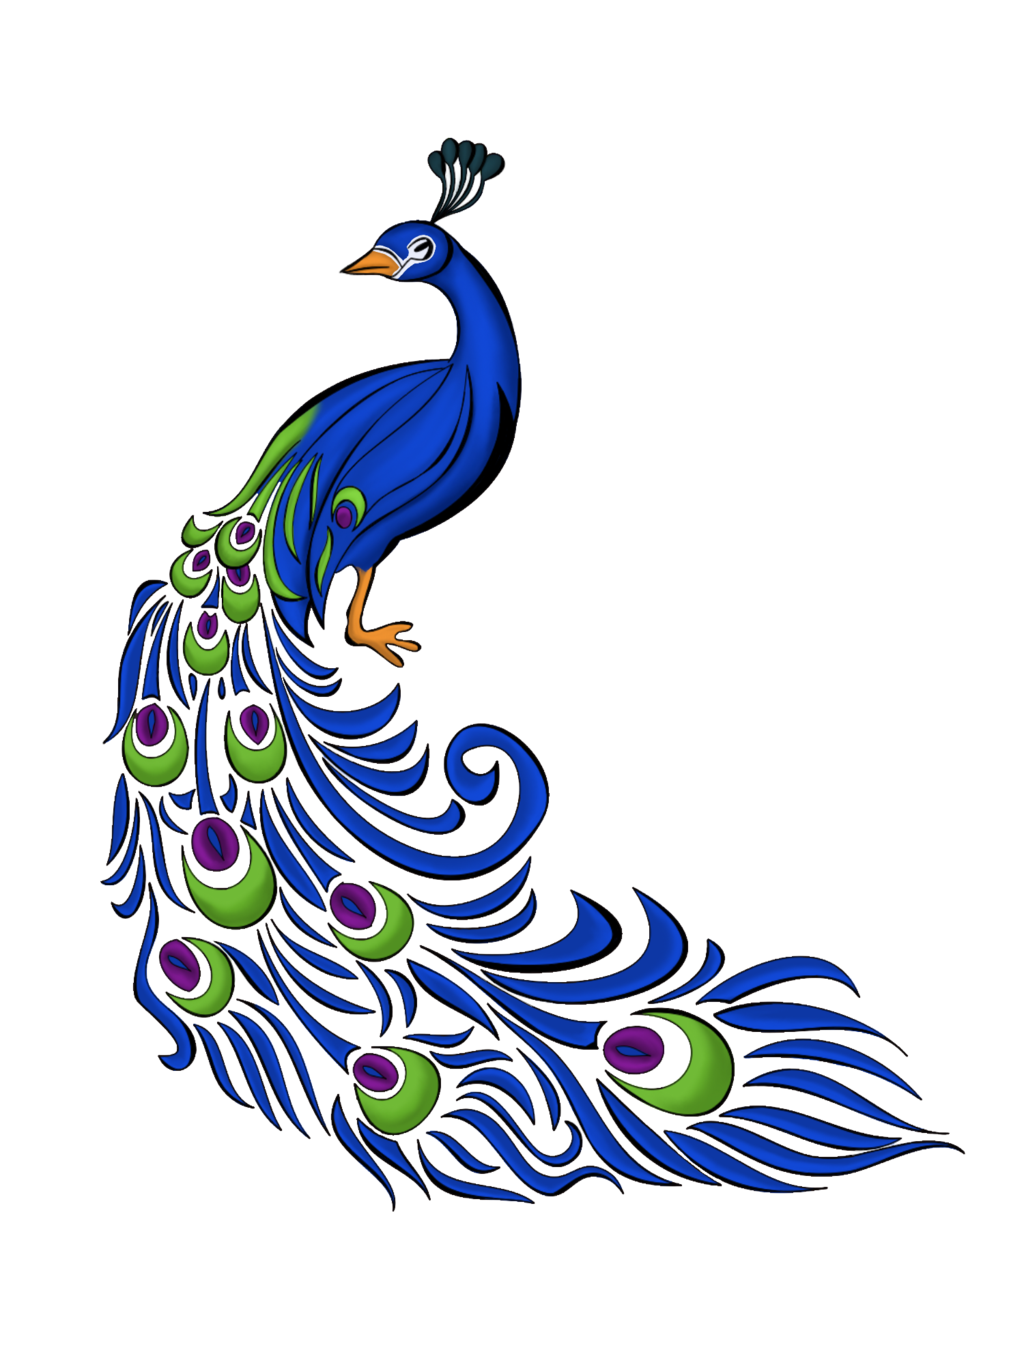 22 Free Peacock Images - Fabulous! | Peacock images, Flower art images,  Peacock wall art